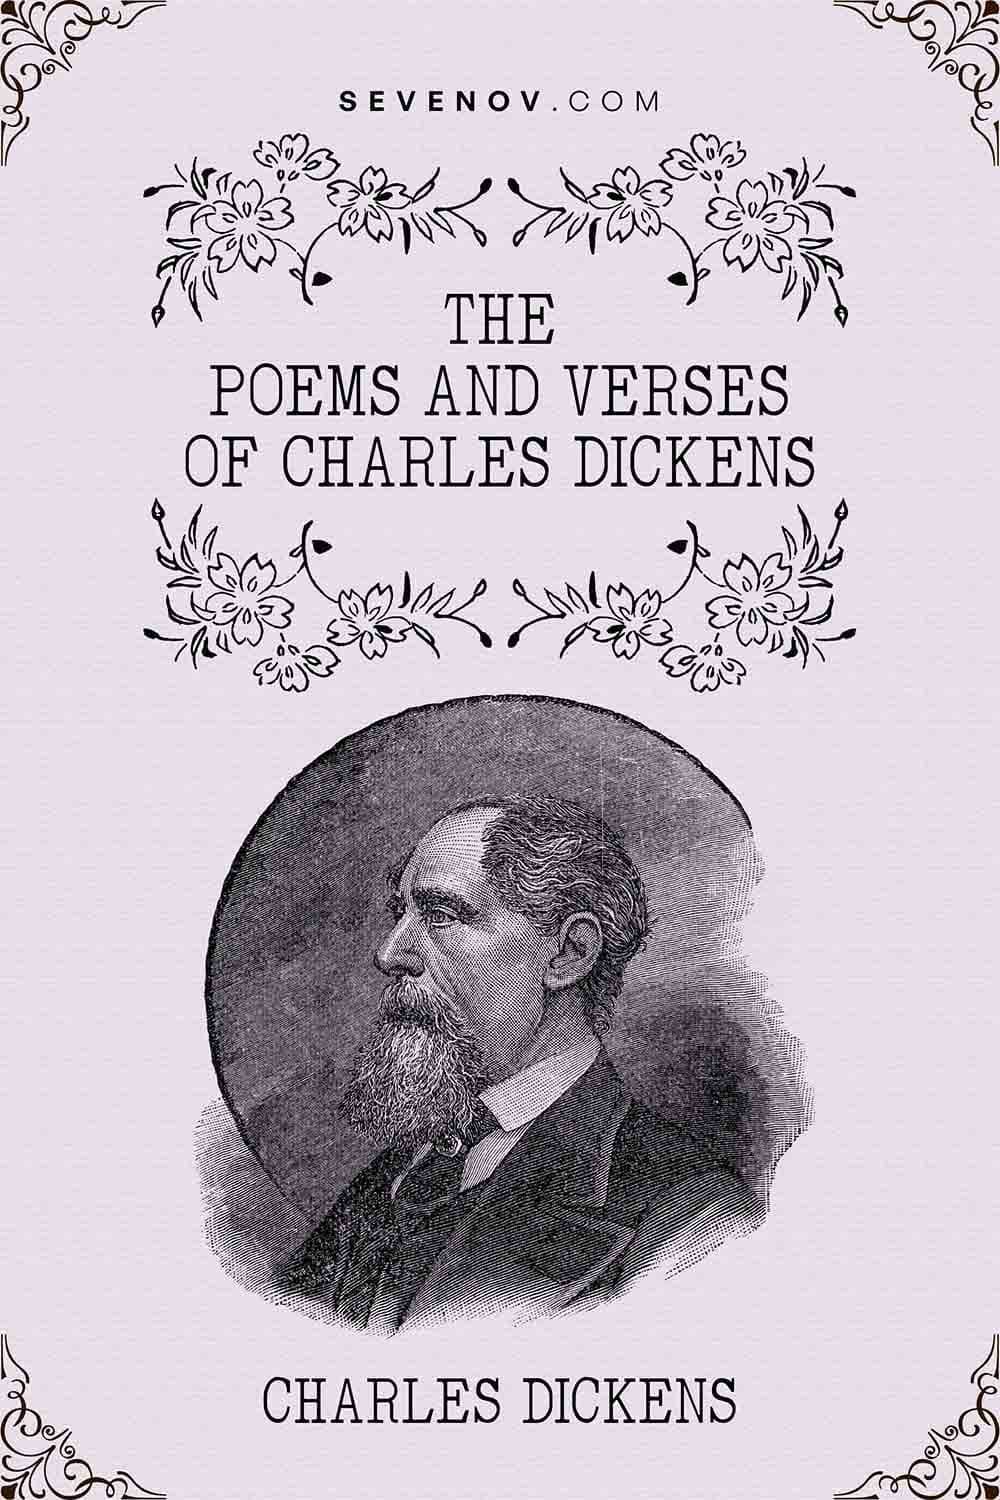 https://pagevio.com/wp-content/uploads/2023/01/the-poems-and-verses-of-charles-dickens-20220902.jpg